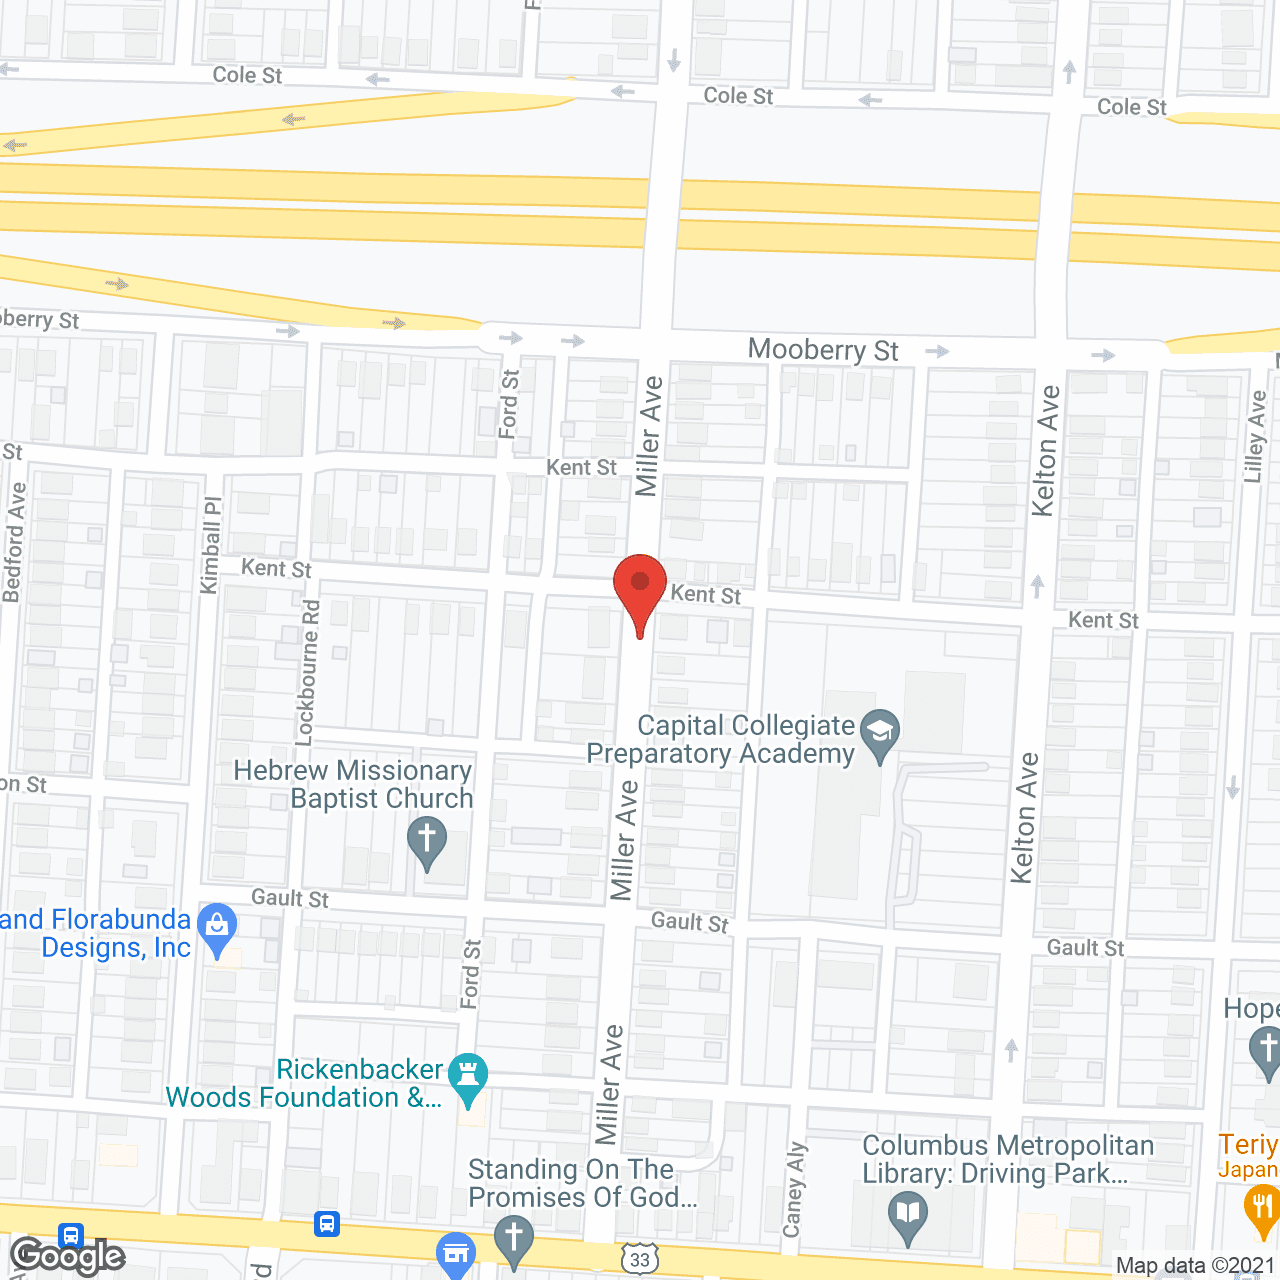 My Friends Place in Unity in google map